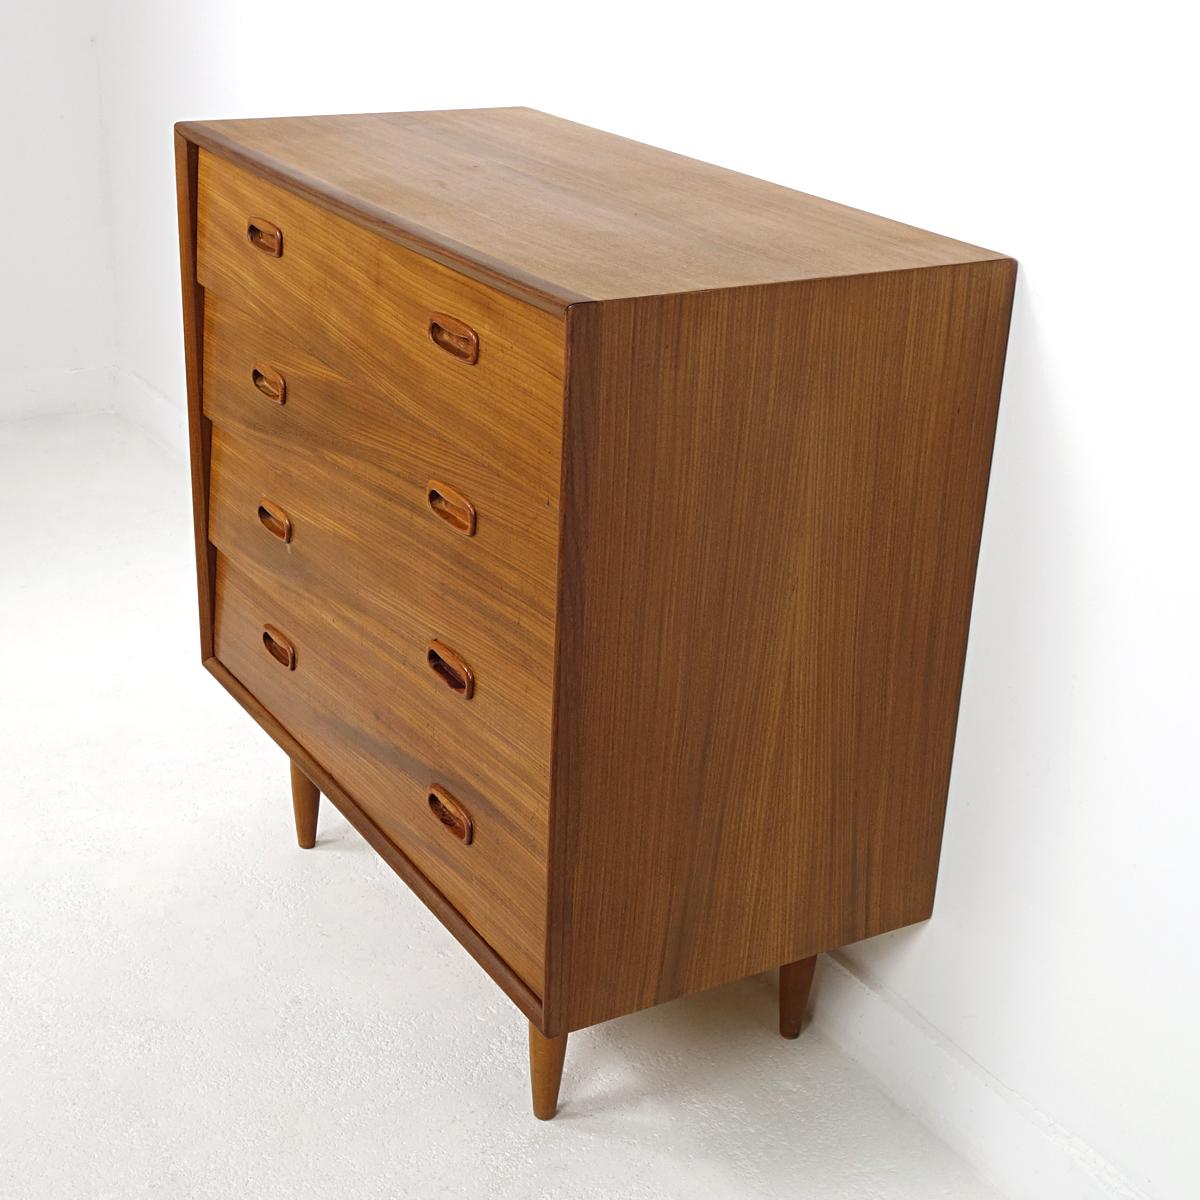 This midcentury chest of four drawers is attributed to Dutch designer Louis Van Teeffelen. The design is sleek and even simple, but there are some refined details, such as the grips and the legs.